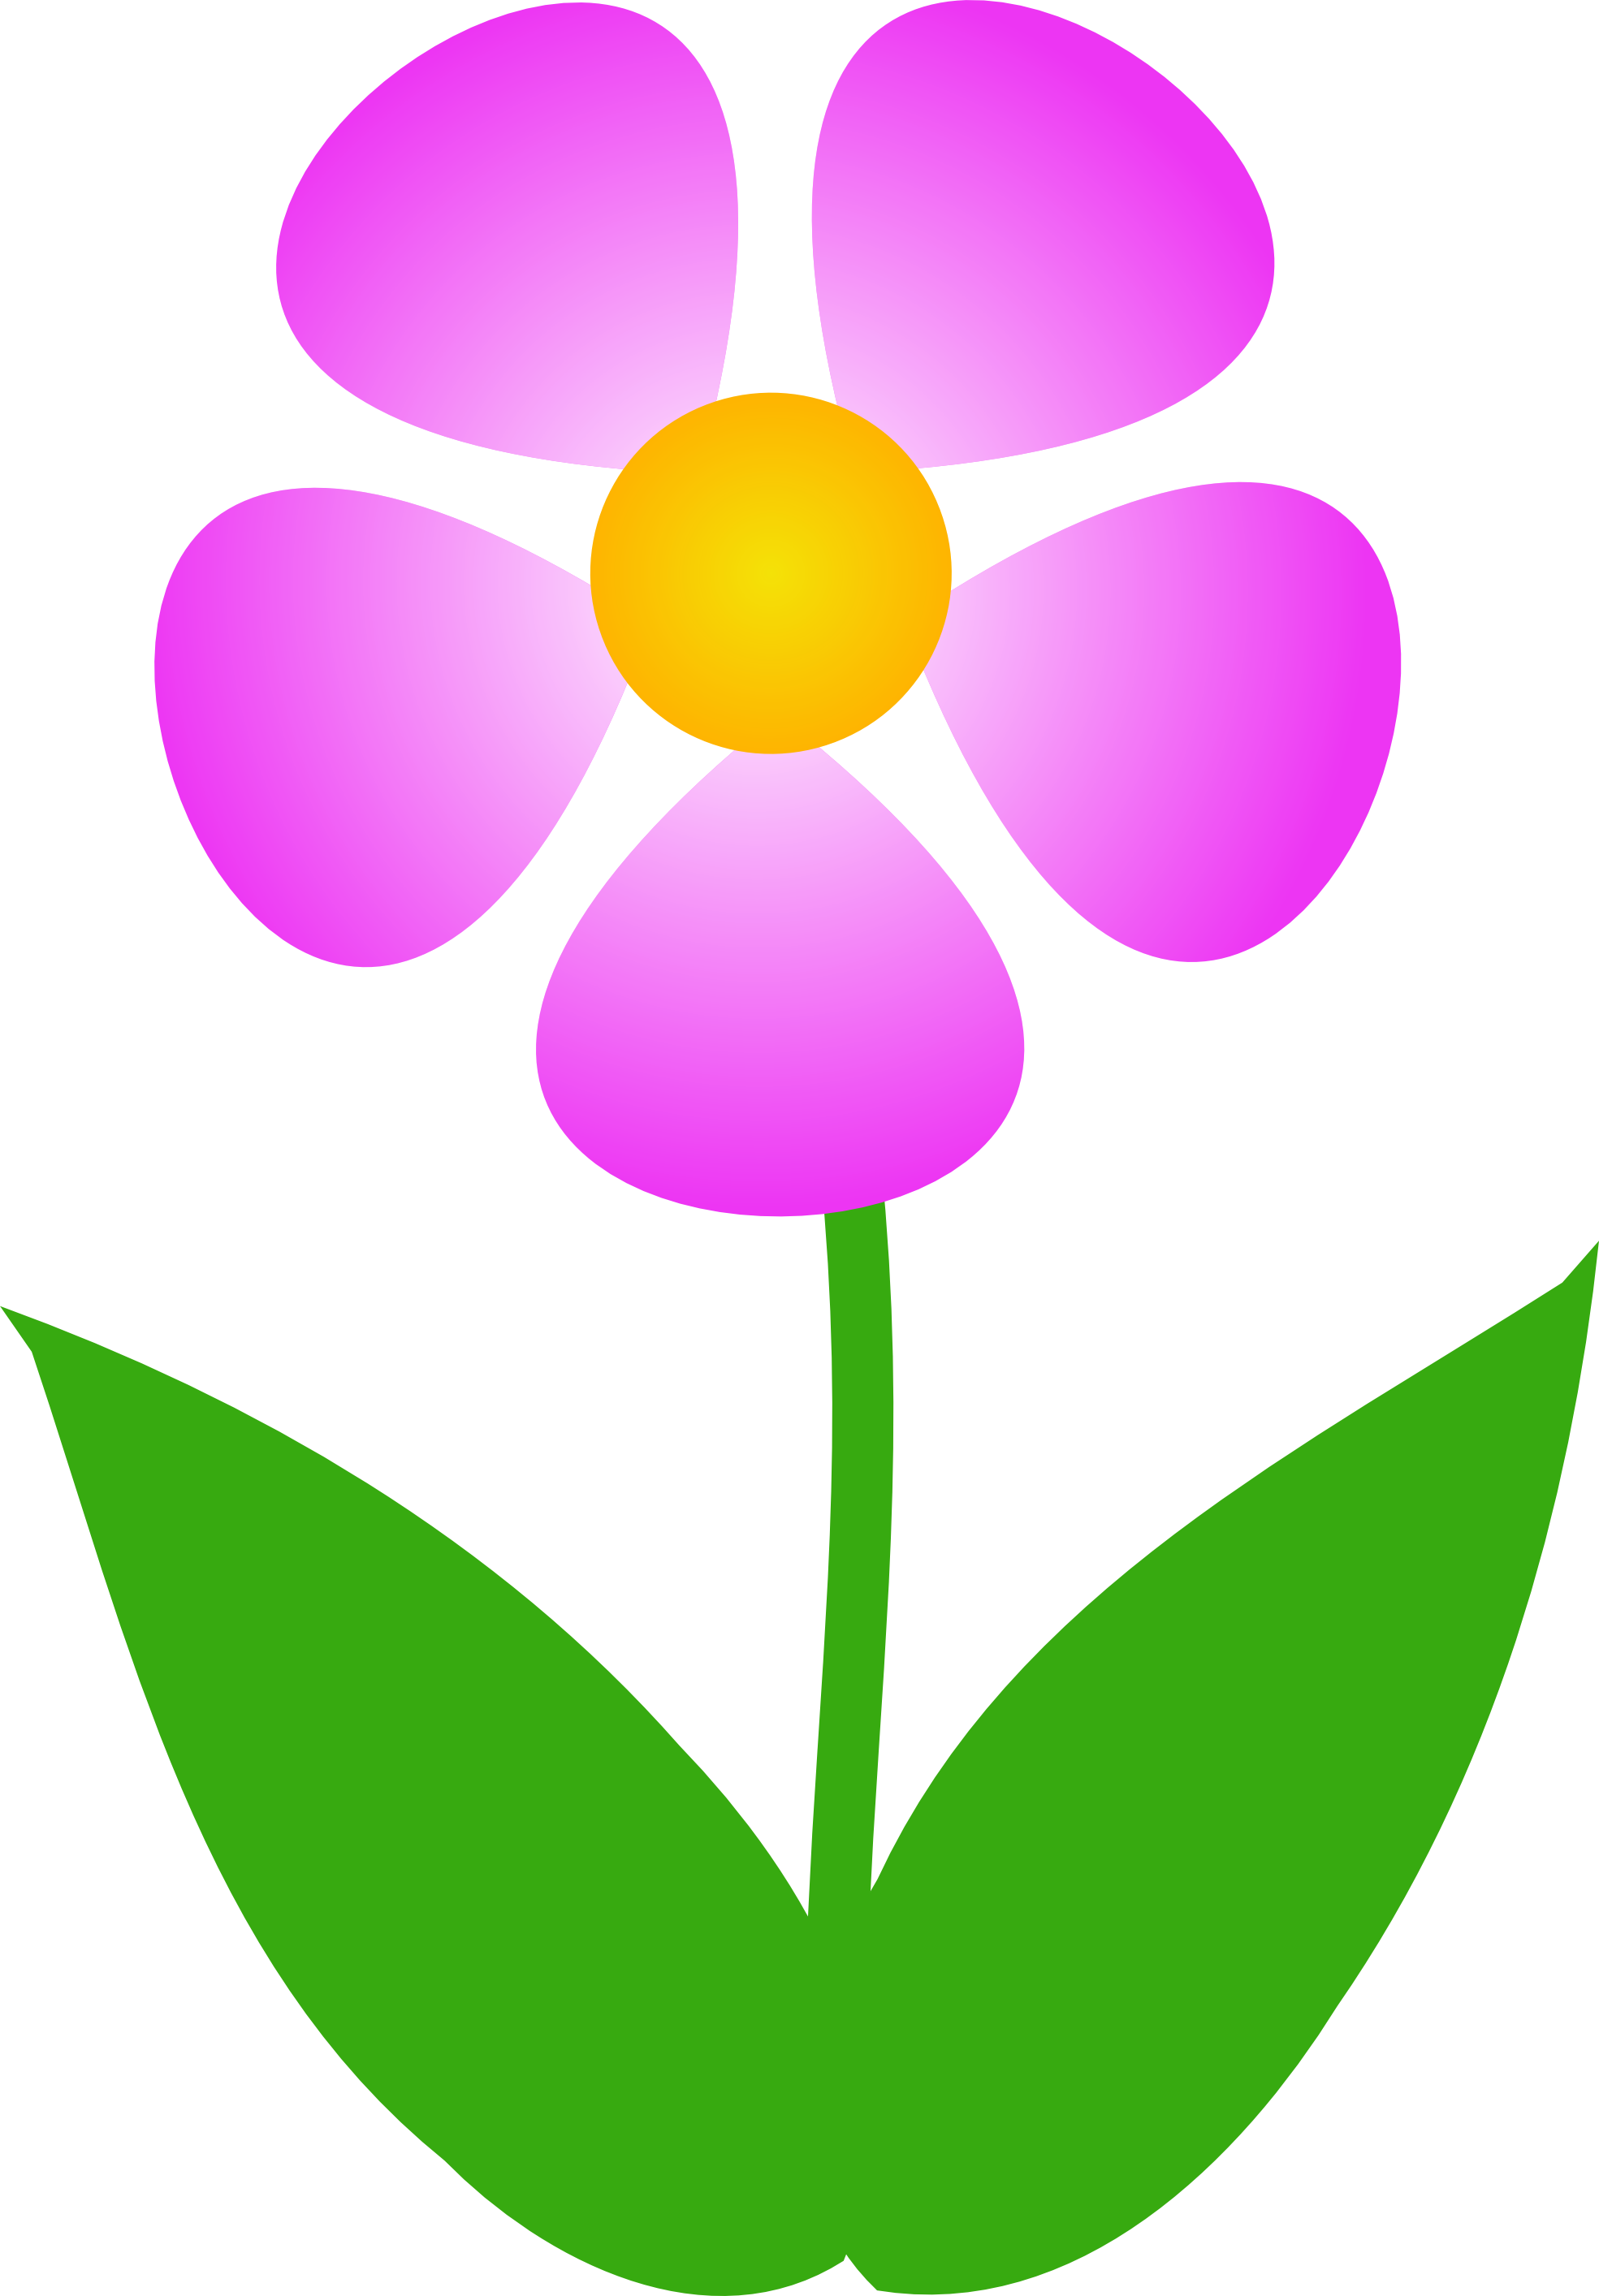 free clipart of a flower - photo #25